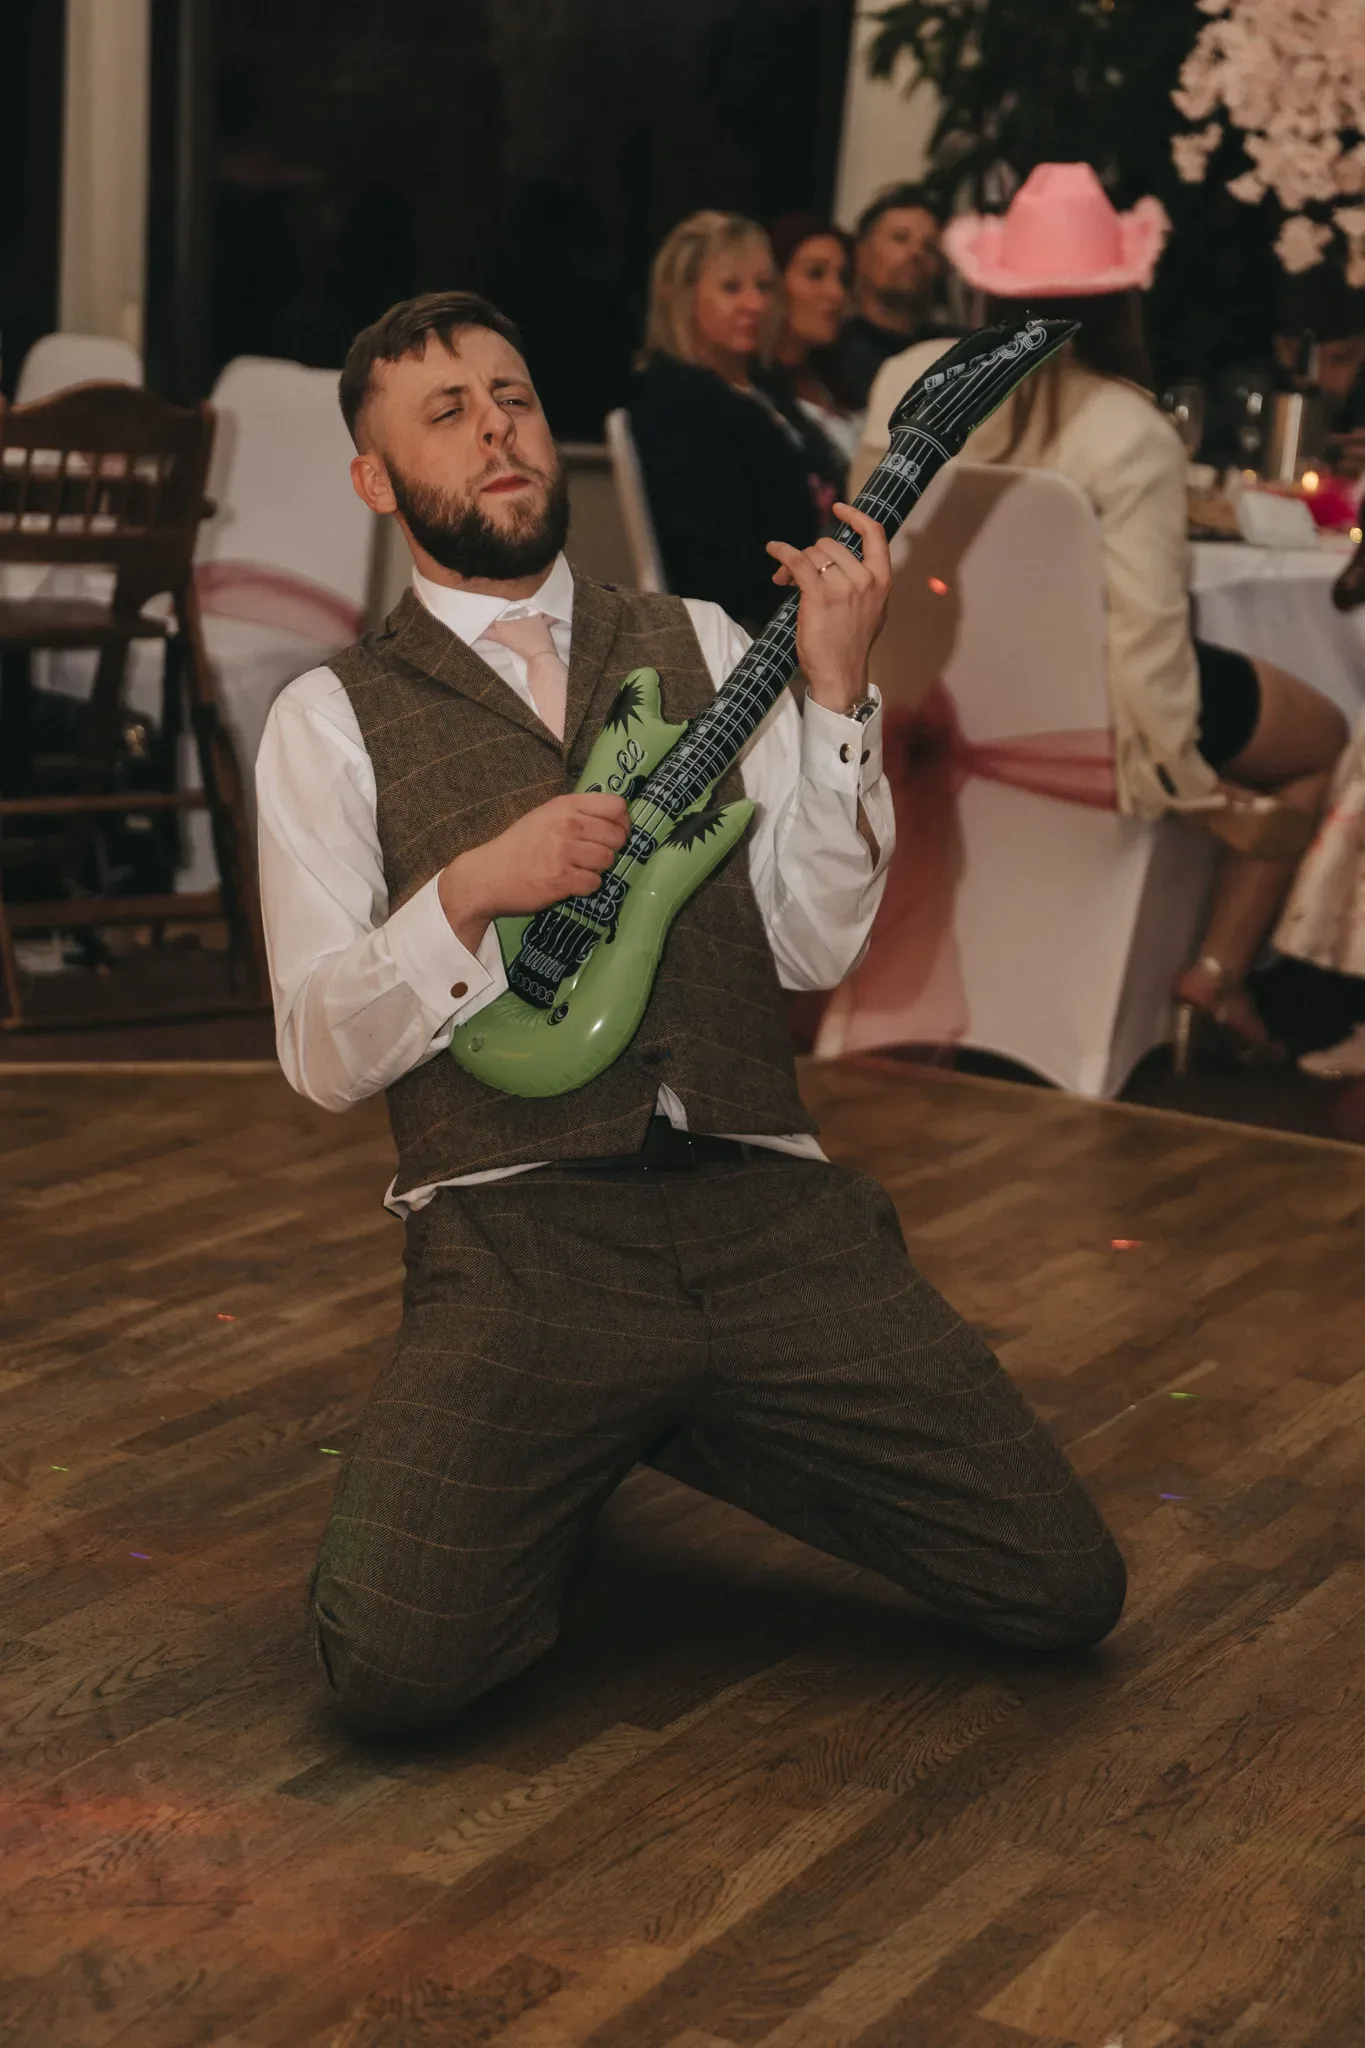 A man in a vest and tie kneels while playing a small green toy guitar, visibly enjoying himself at an indoor event with guests seated in the background.